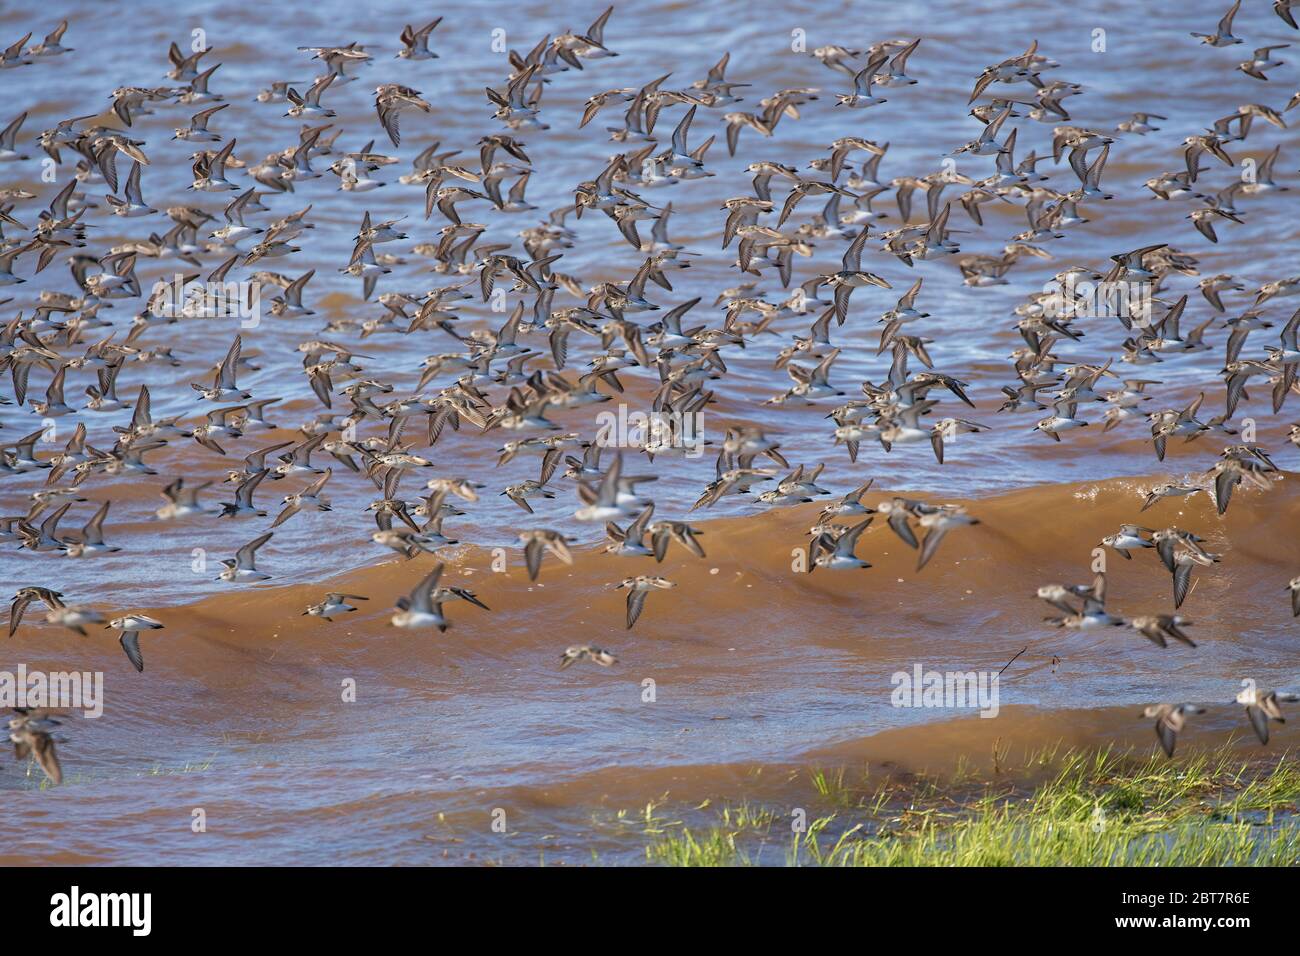 Sandpipers and Plovers flying over the water near Grand Pre, Nova Scotia, Canada. Stock Photo